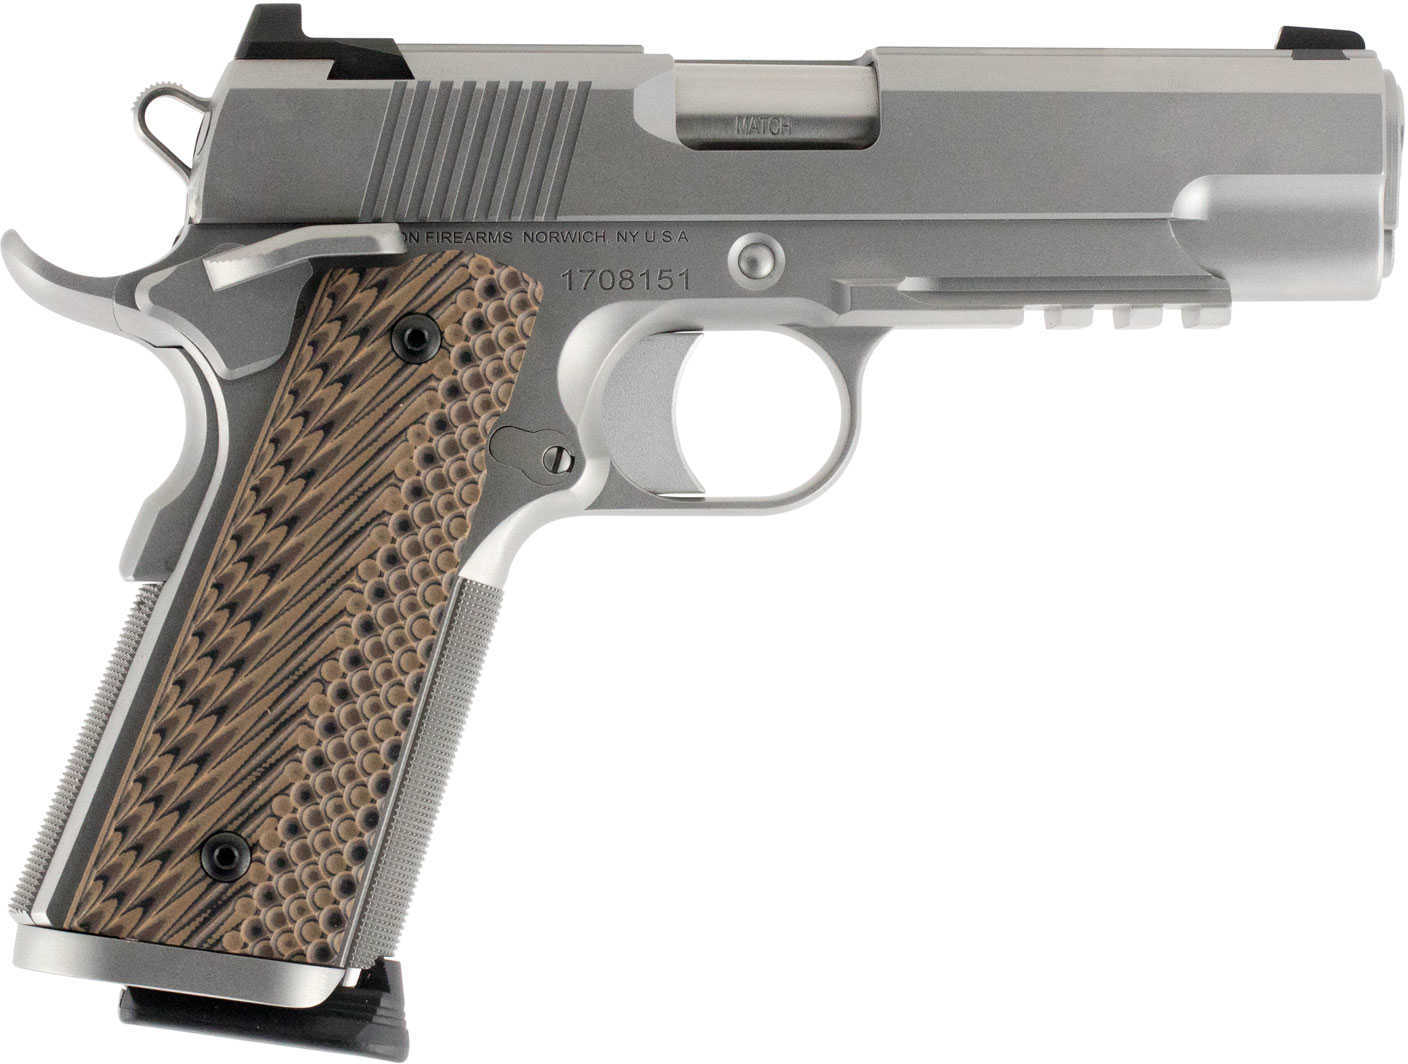 Dan Wesson Specialist Commander 45 ACP 4.25" Barrel 8 Round Stainless Steel Finish G10 Grip Semi Automatic Pistol 01891